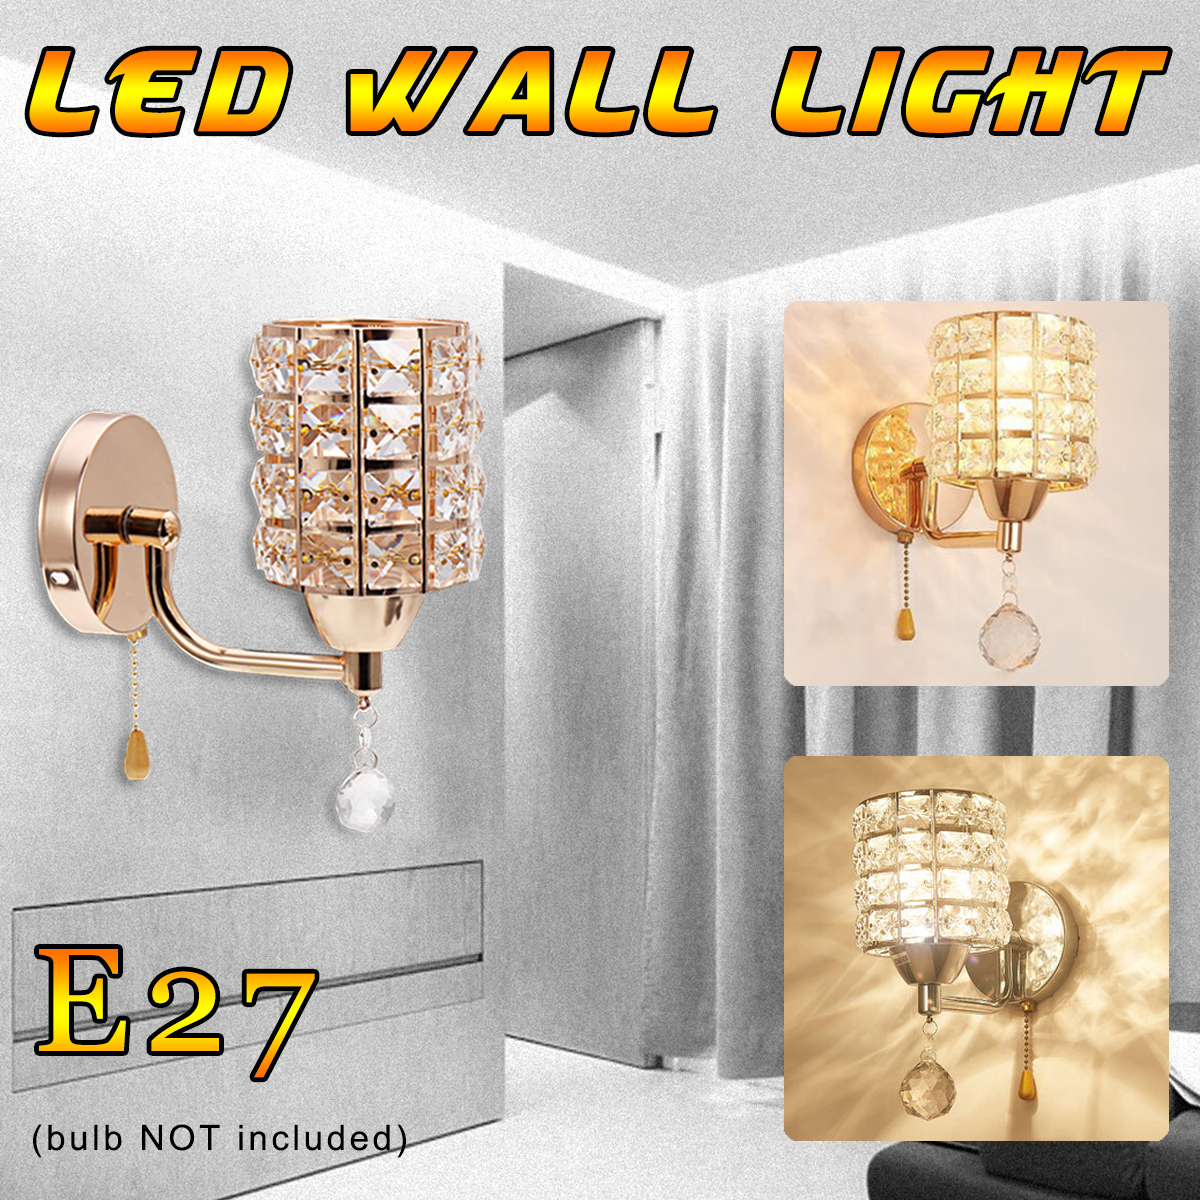 AC85-265V-Luxury-Crystal-Wall-Light-Modern-E27-Bedroom-Aisle-Sconce-Lighting-Lamp-Fixtures-Without-B-1794630-2